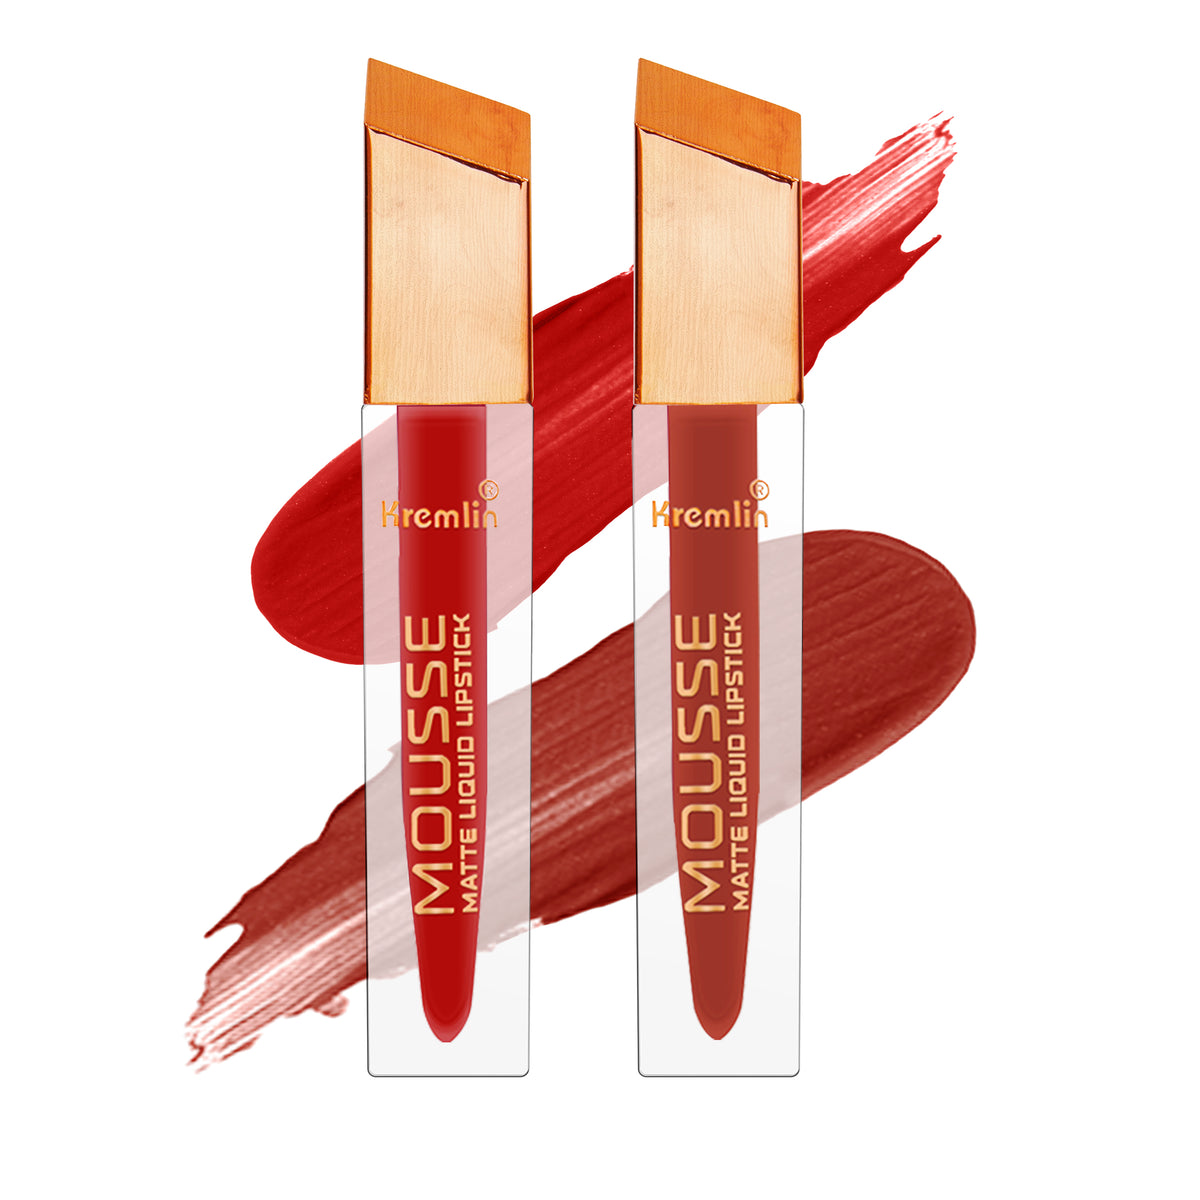 Kremlin Mousse Matte Liquid Lipstick Lips Pack of 2 (Chilling Lips, Normally Nude)